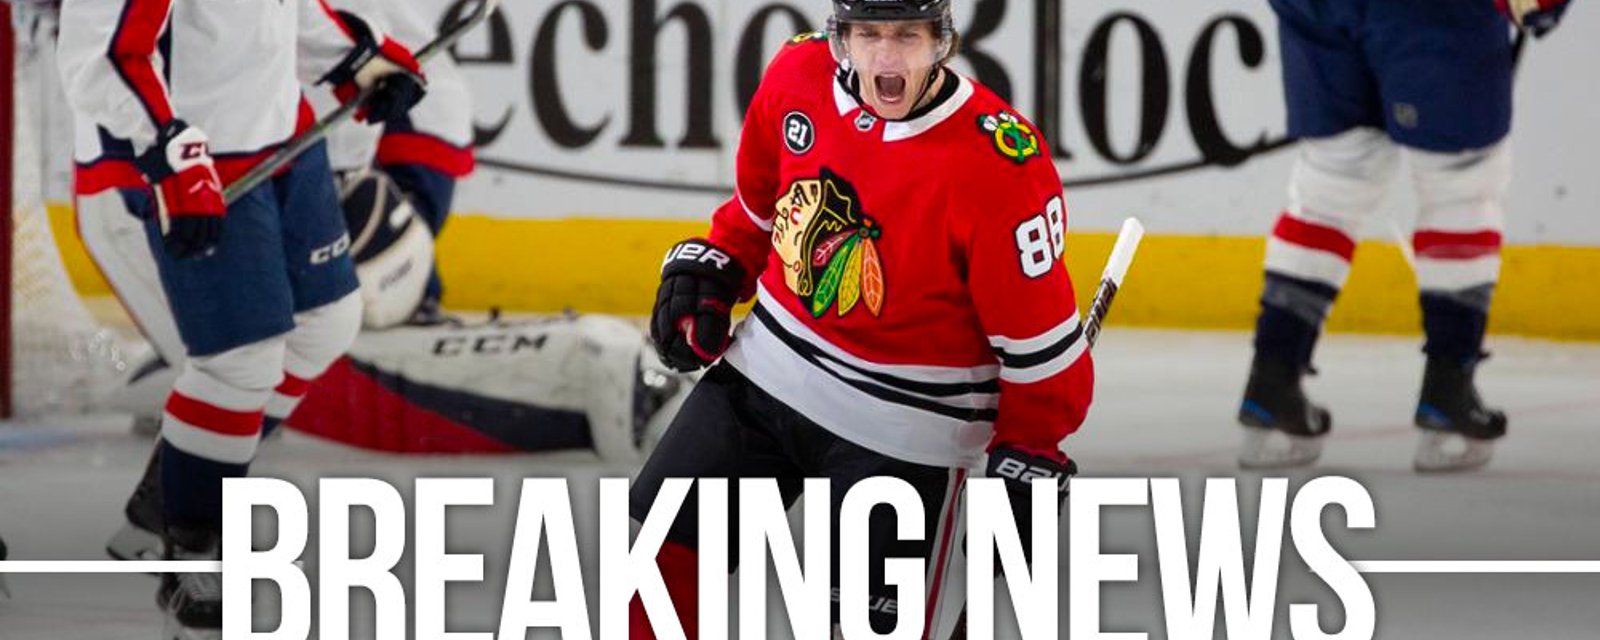 Patrick Kane has reportedly been traded